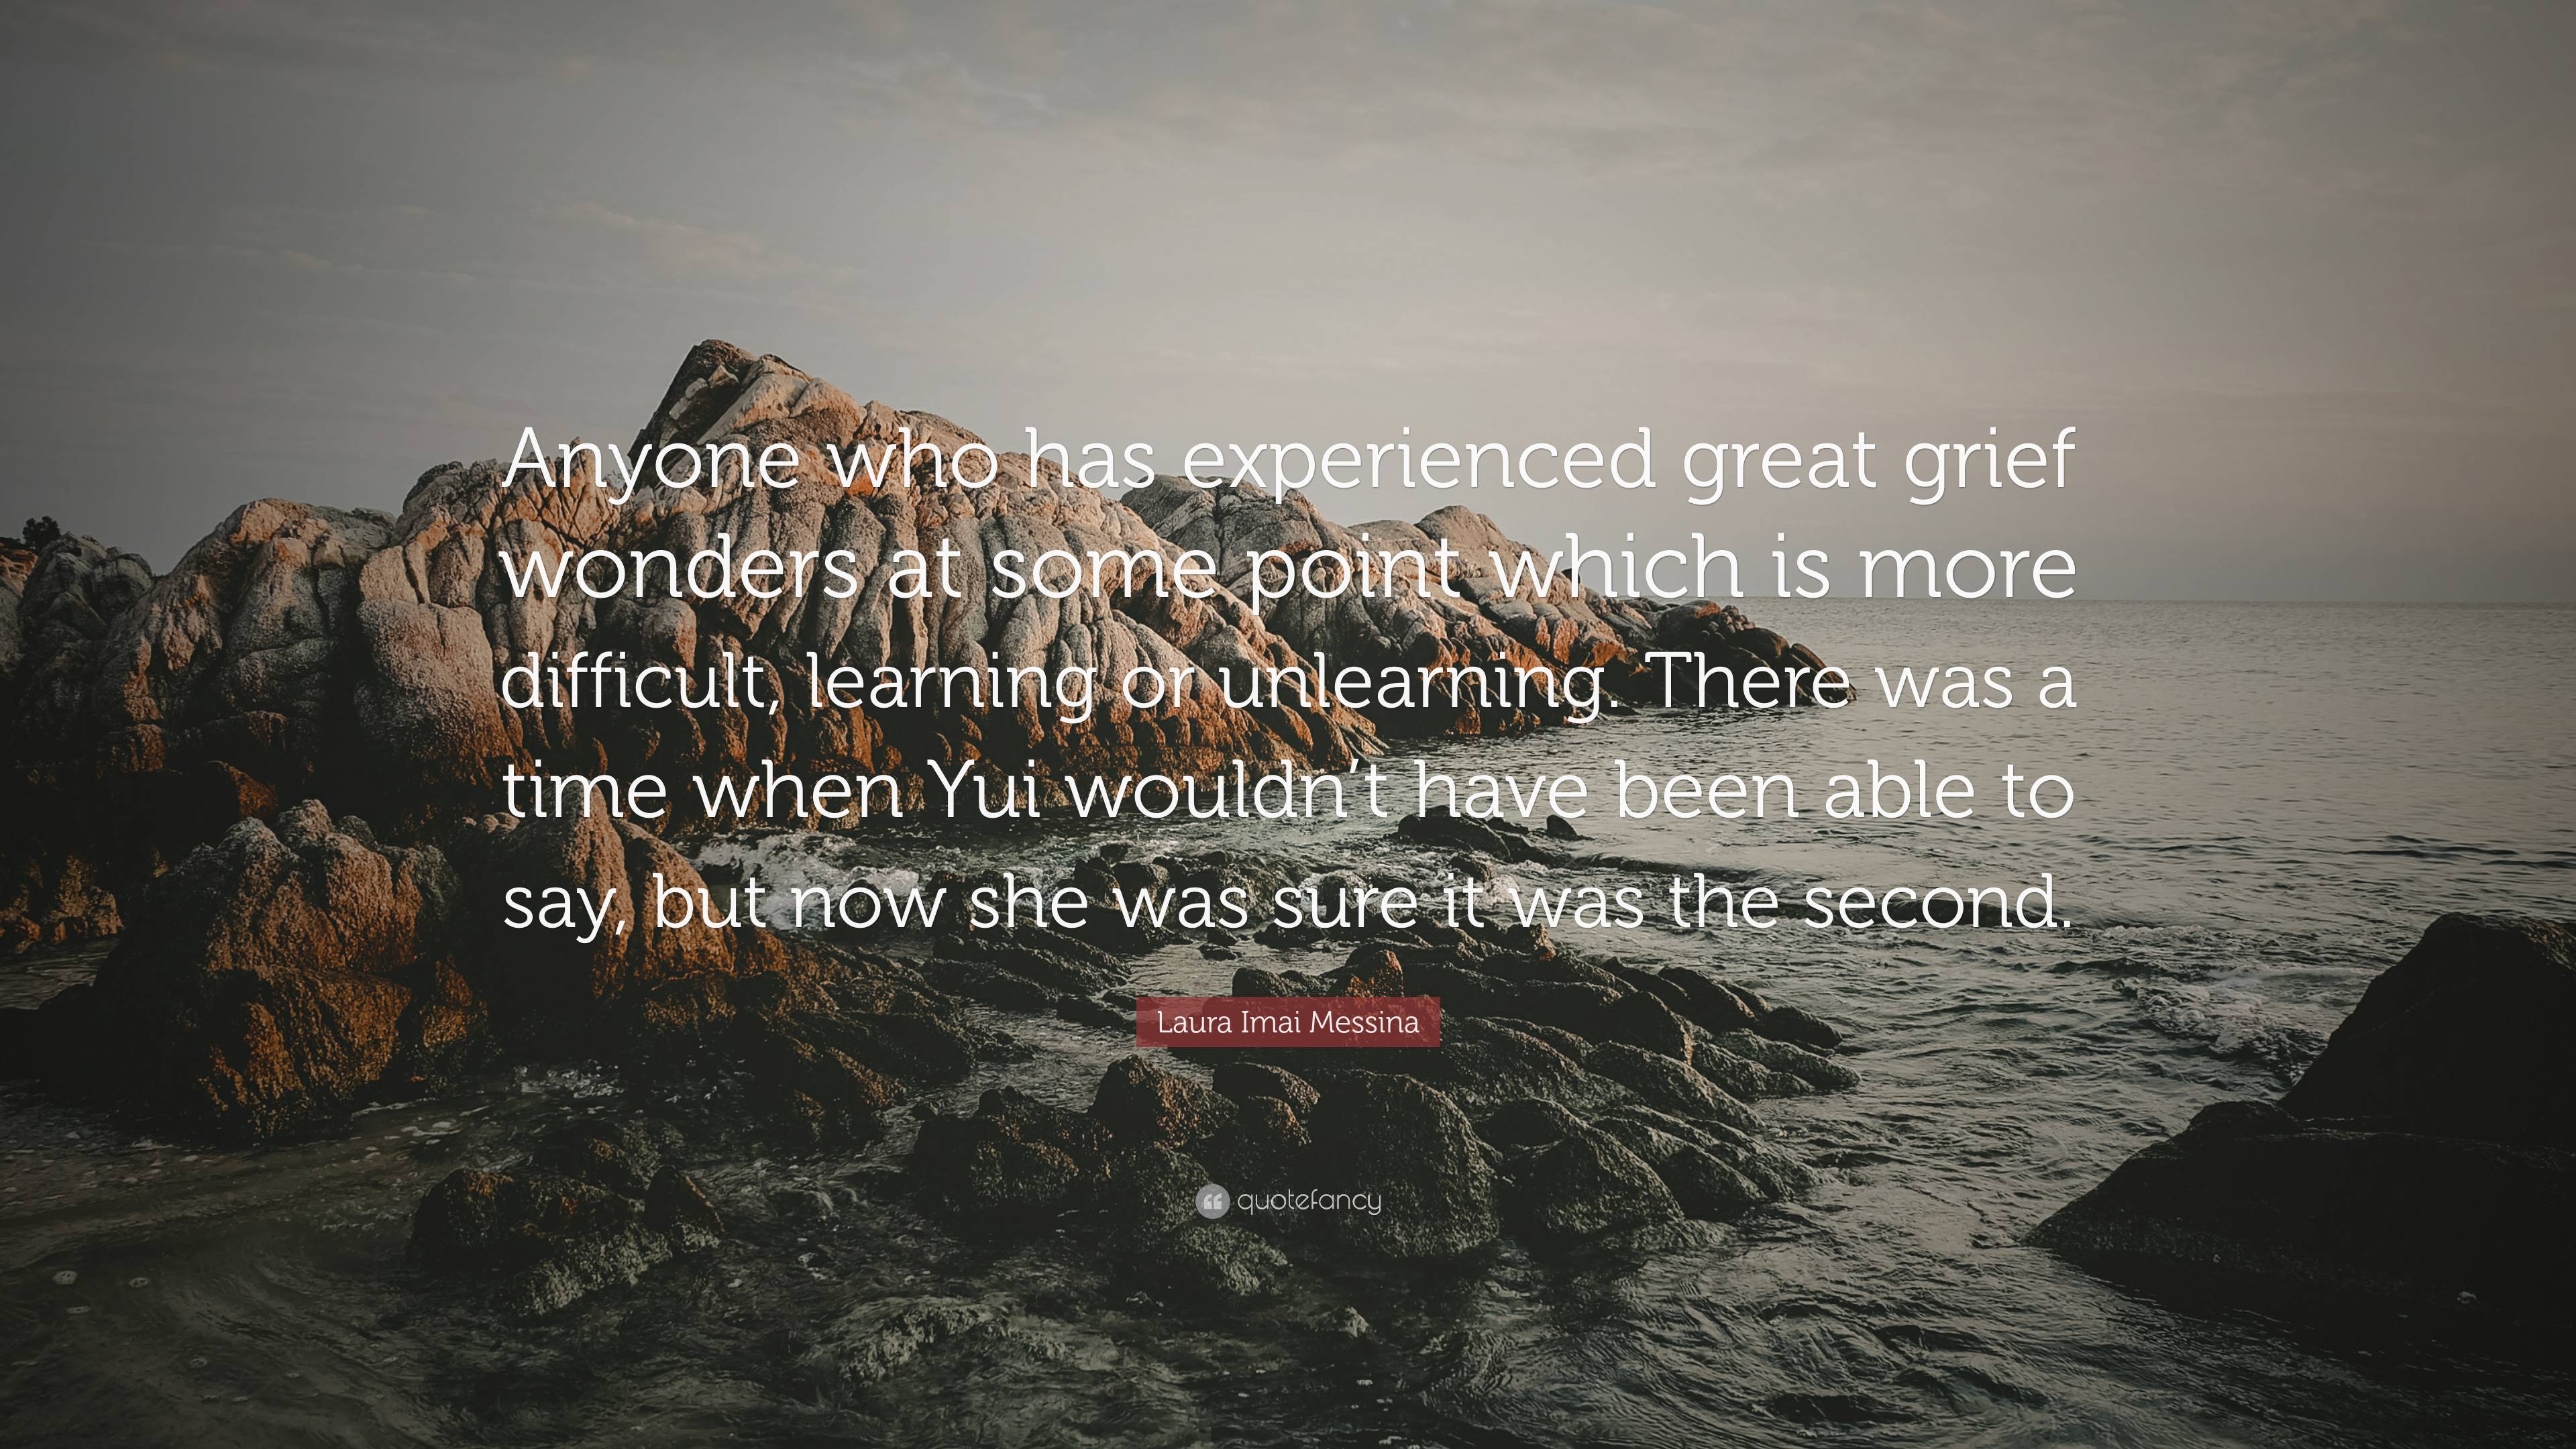 Laura Imai Messina Quote: “Anyone who has experienced great grief wonders  at some point which is more difficult, learning or unlearning. There was  ”